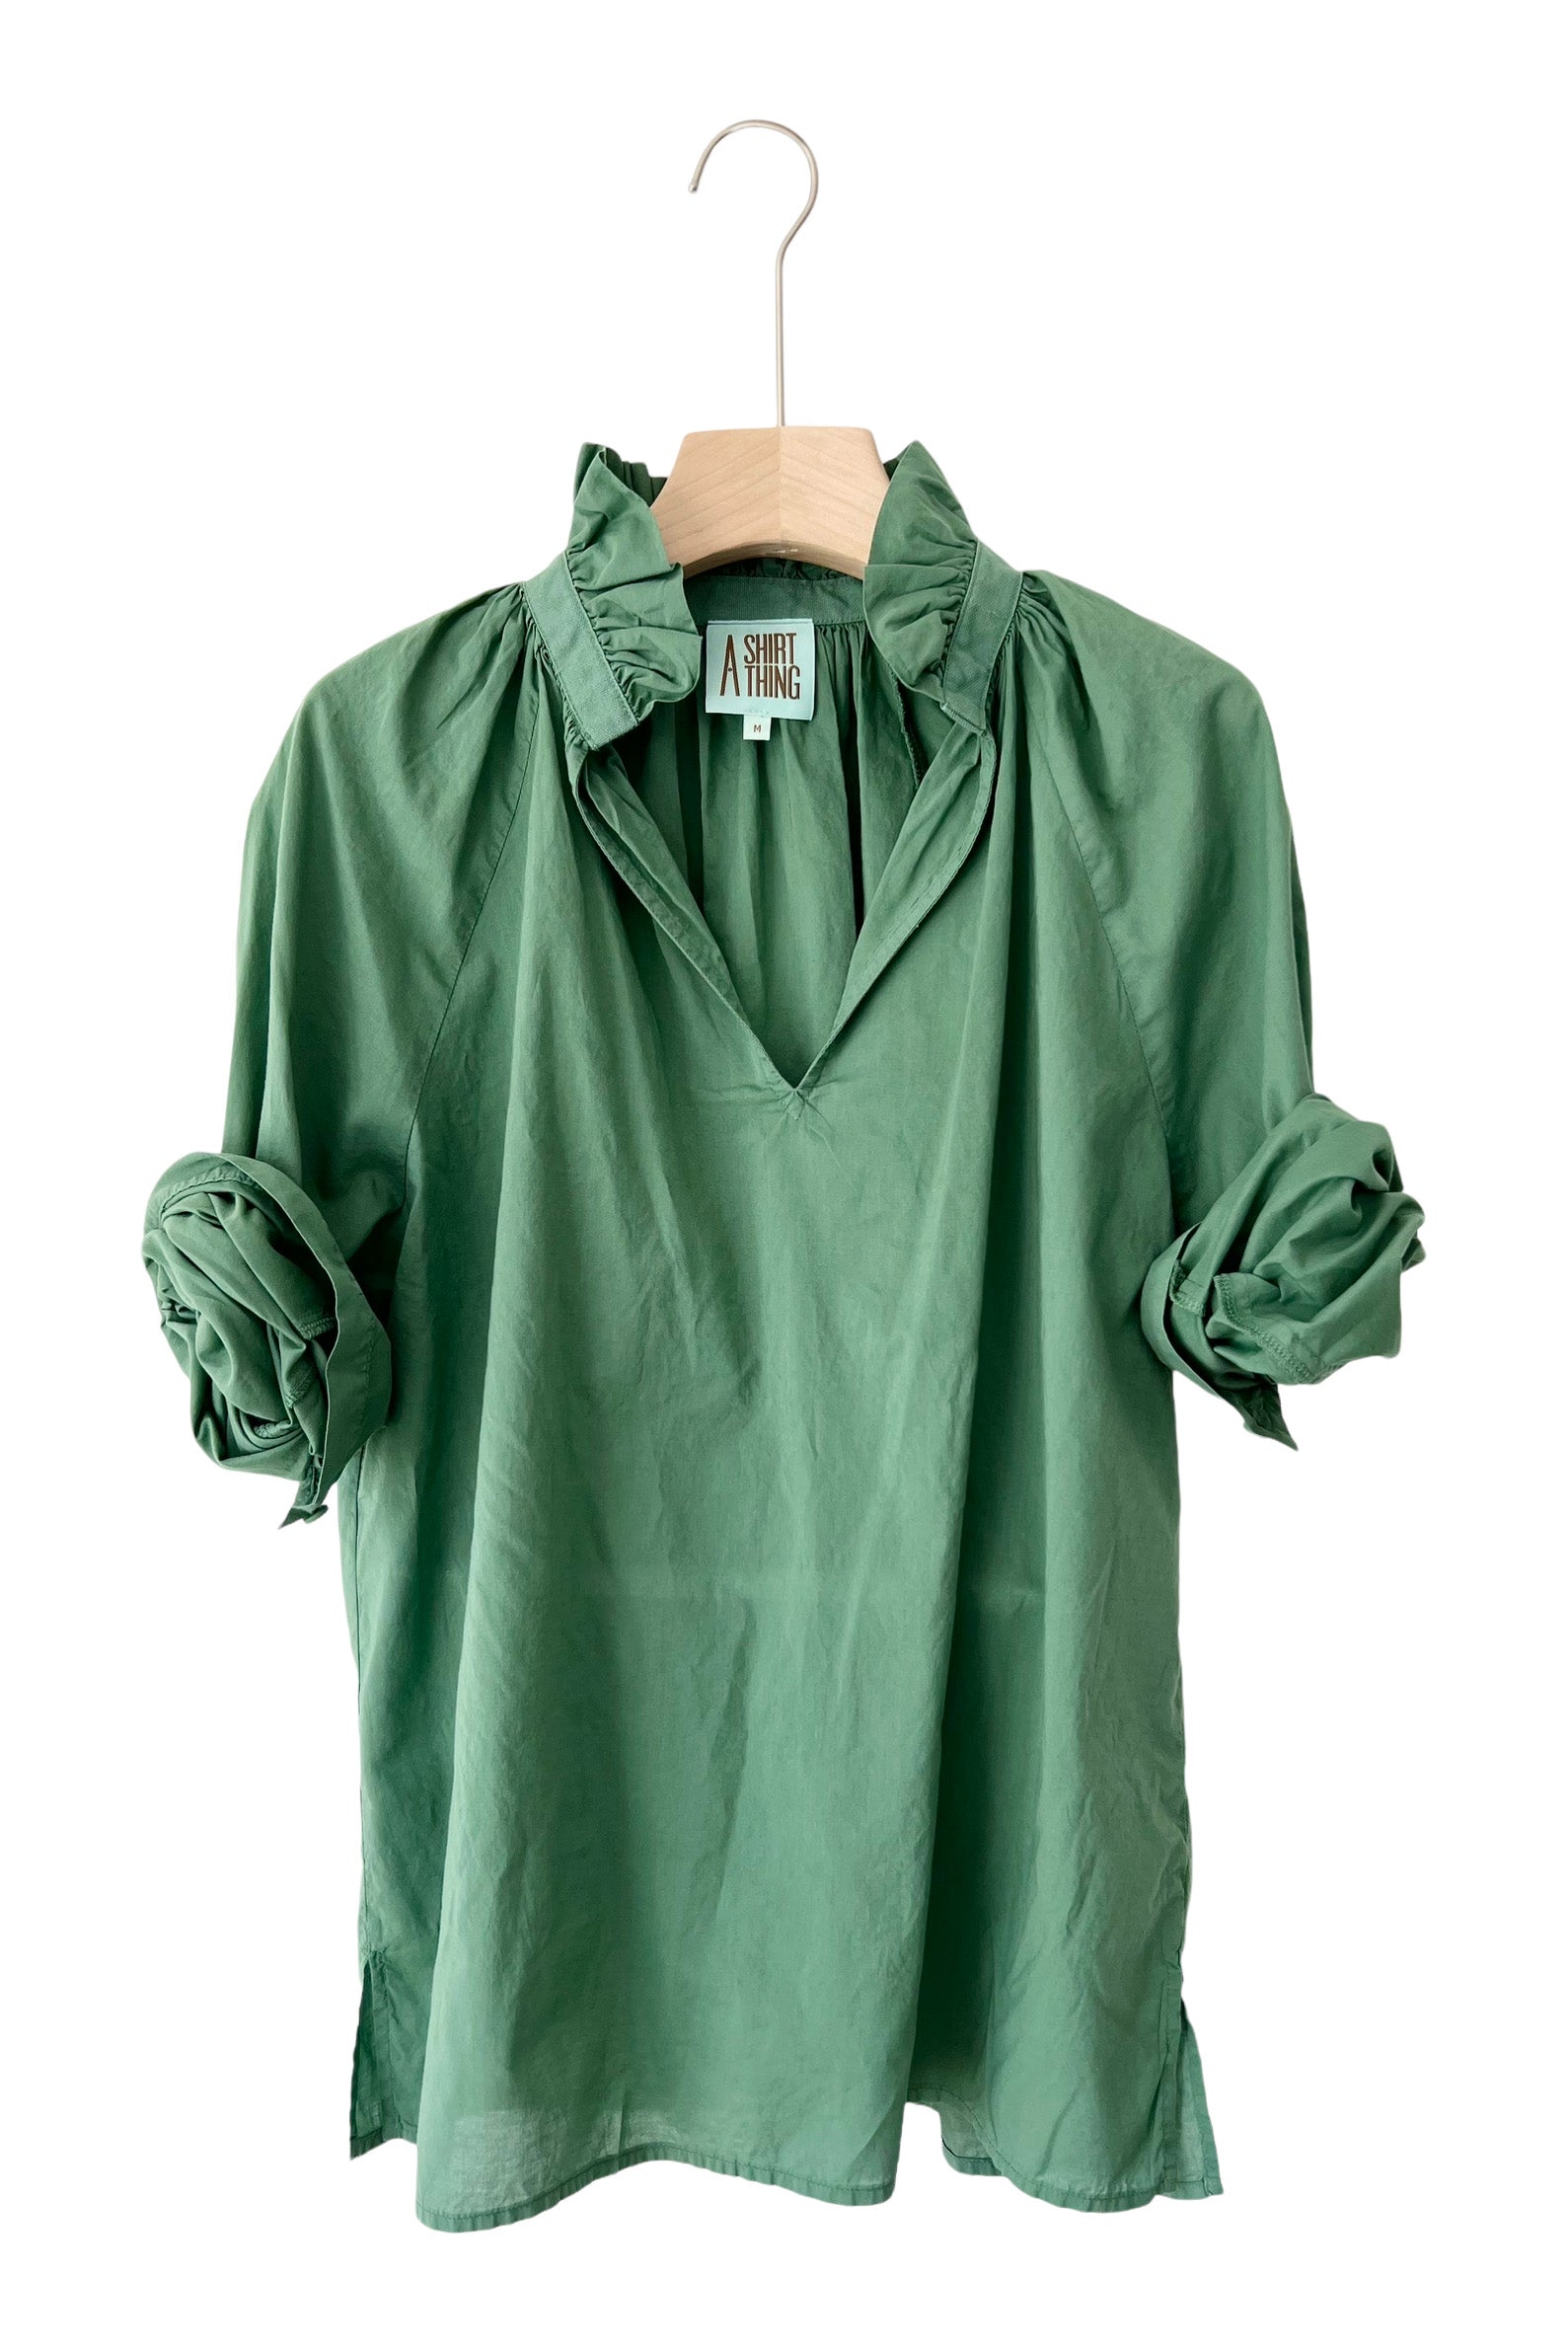 A Shirt Thing Penelope Cabo Top in Bottle Green